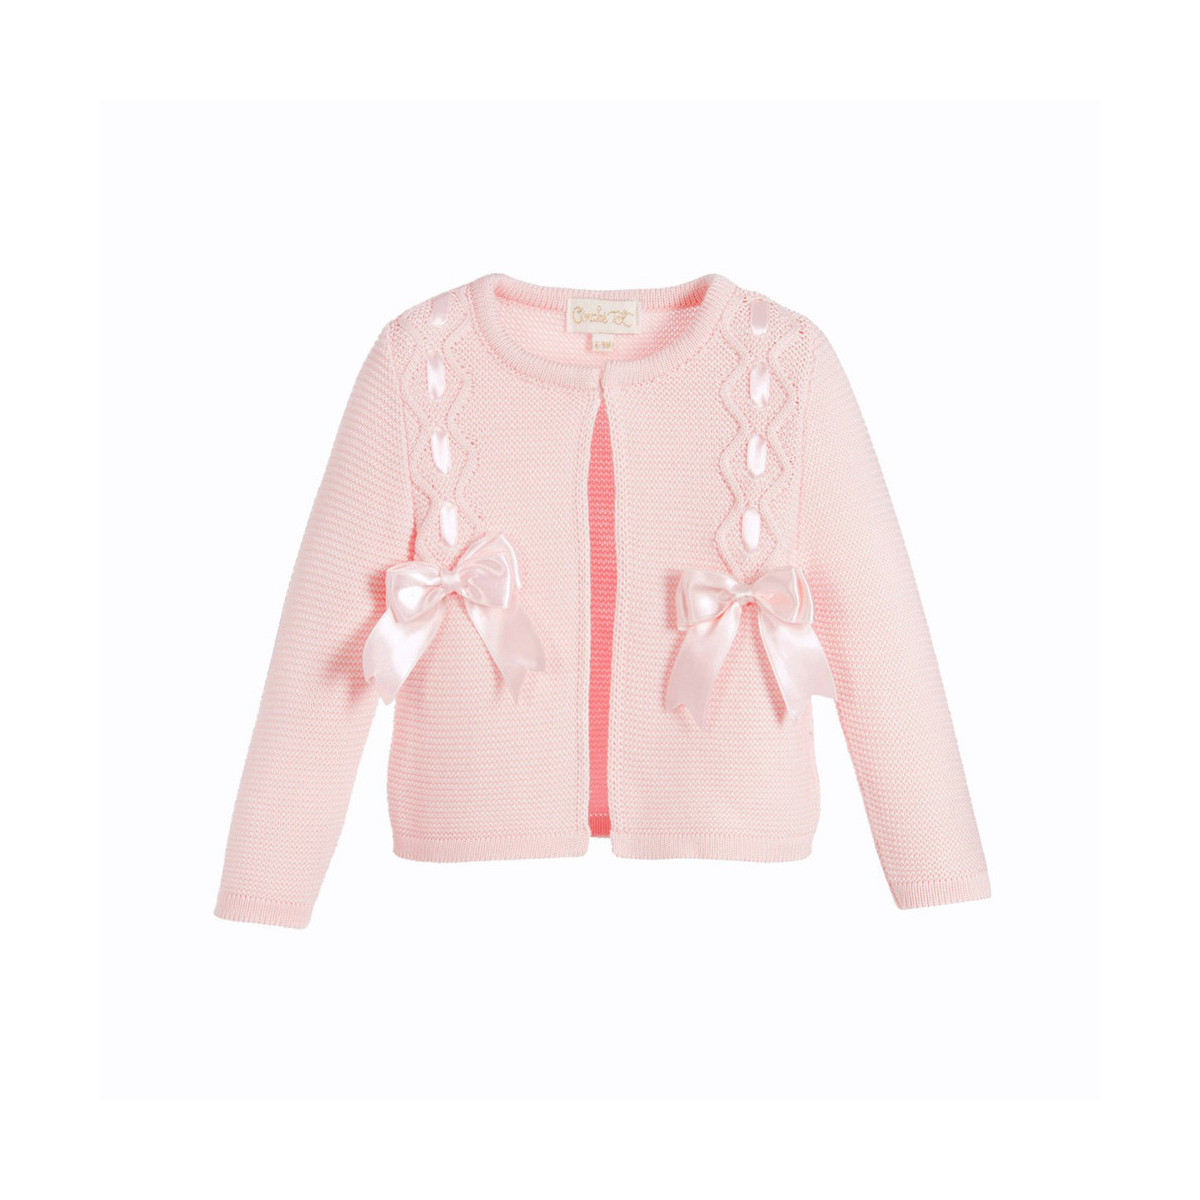 Girls Cotton Cardigan with Bows